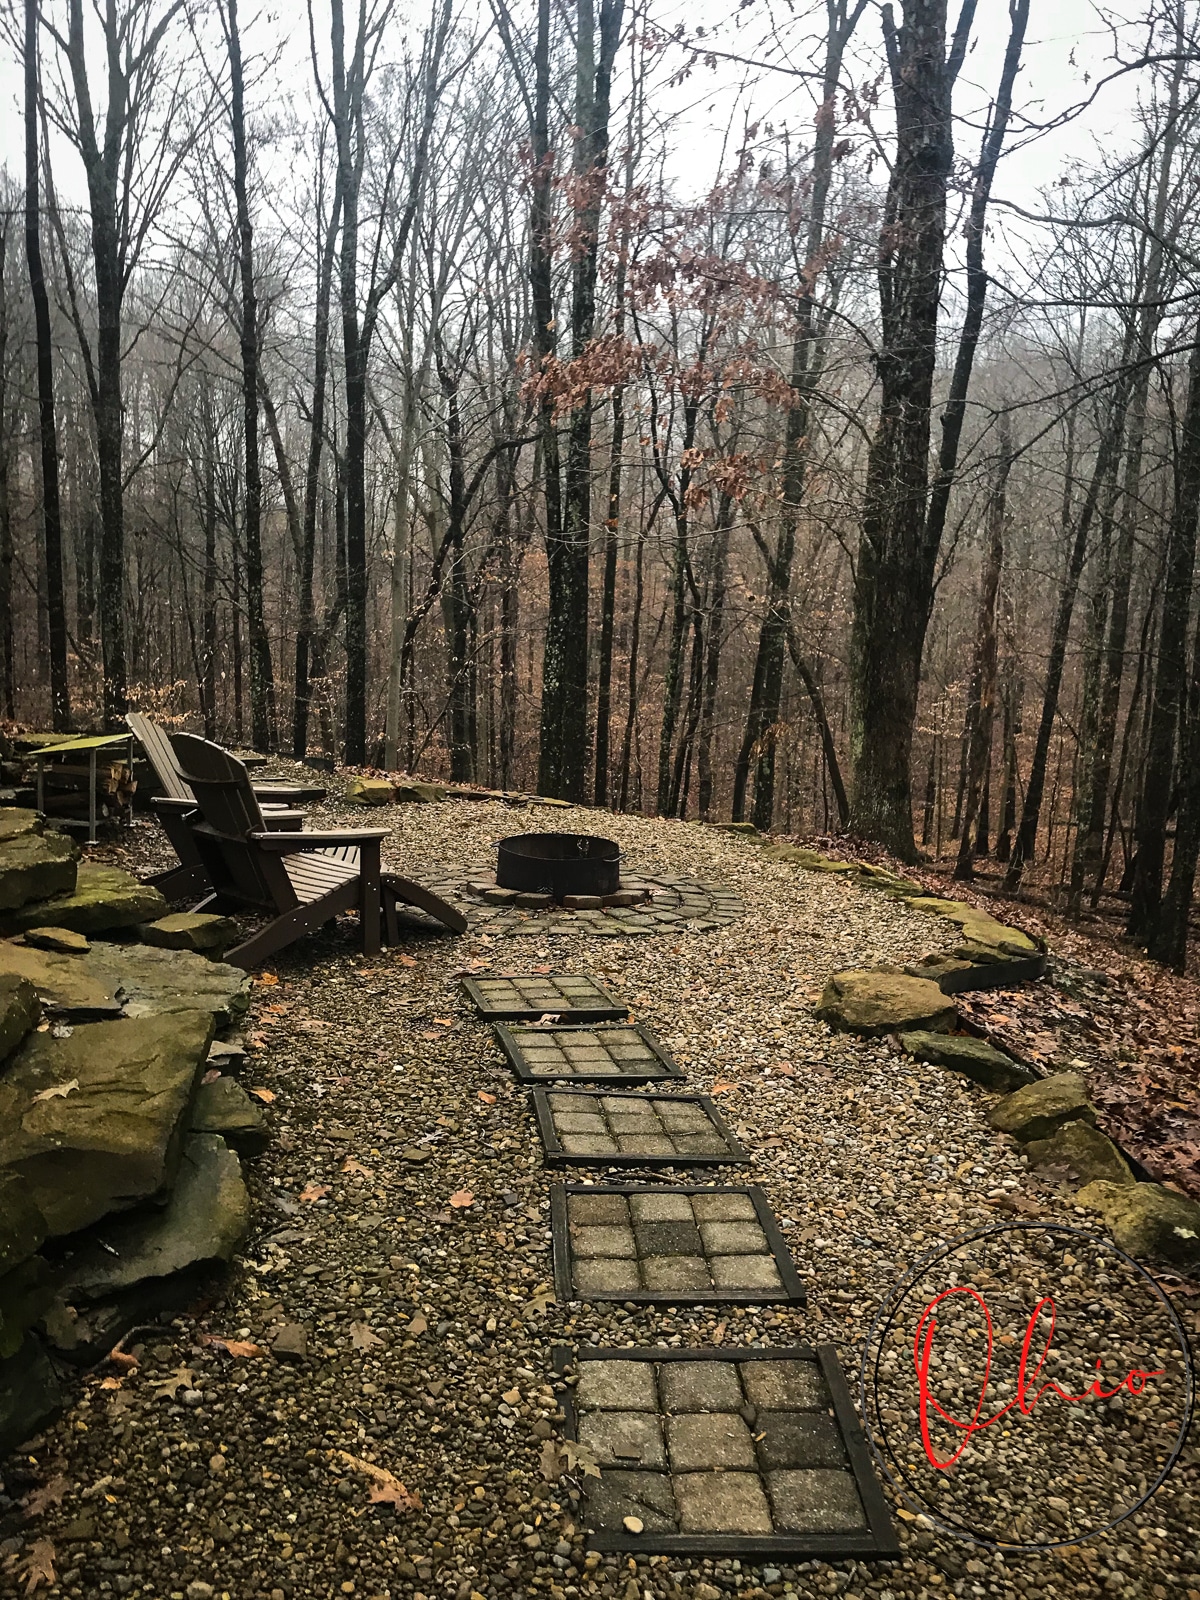 dark fall day in woods with trees with no lives, stone walk way to fire pit